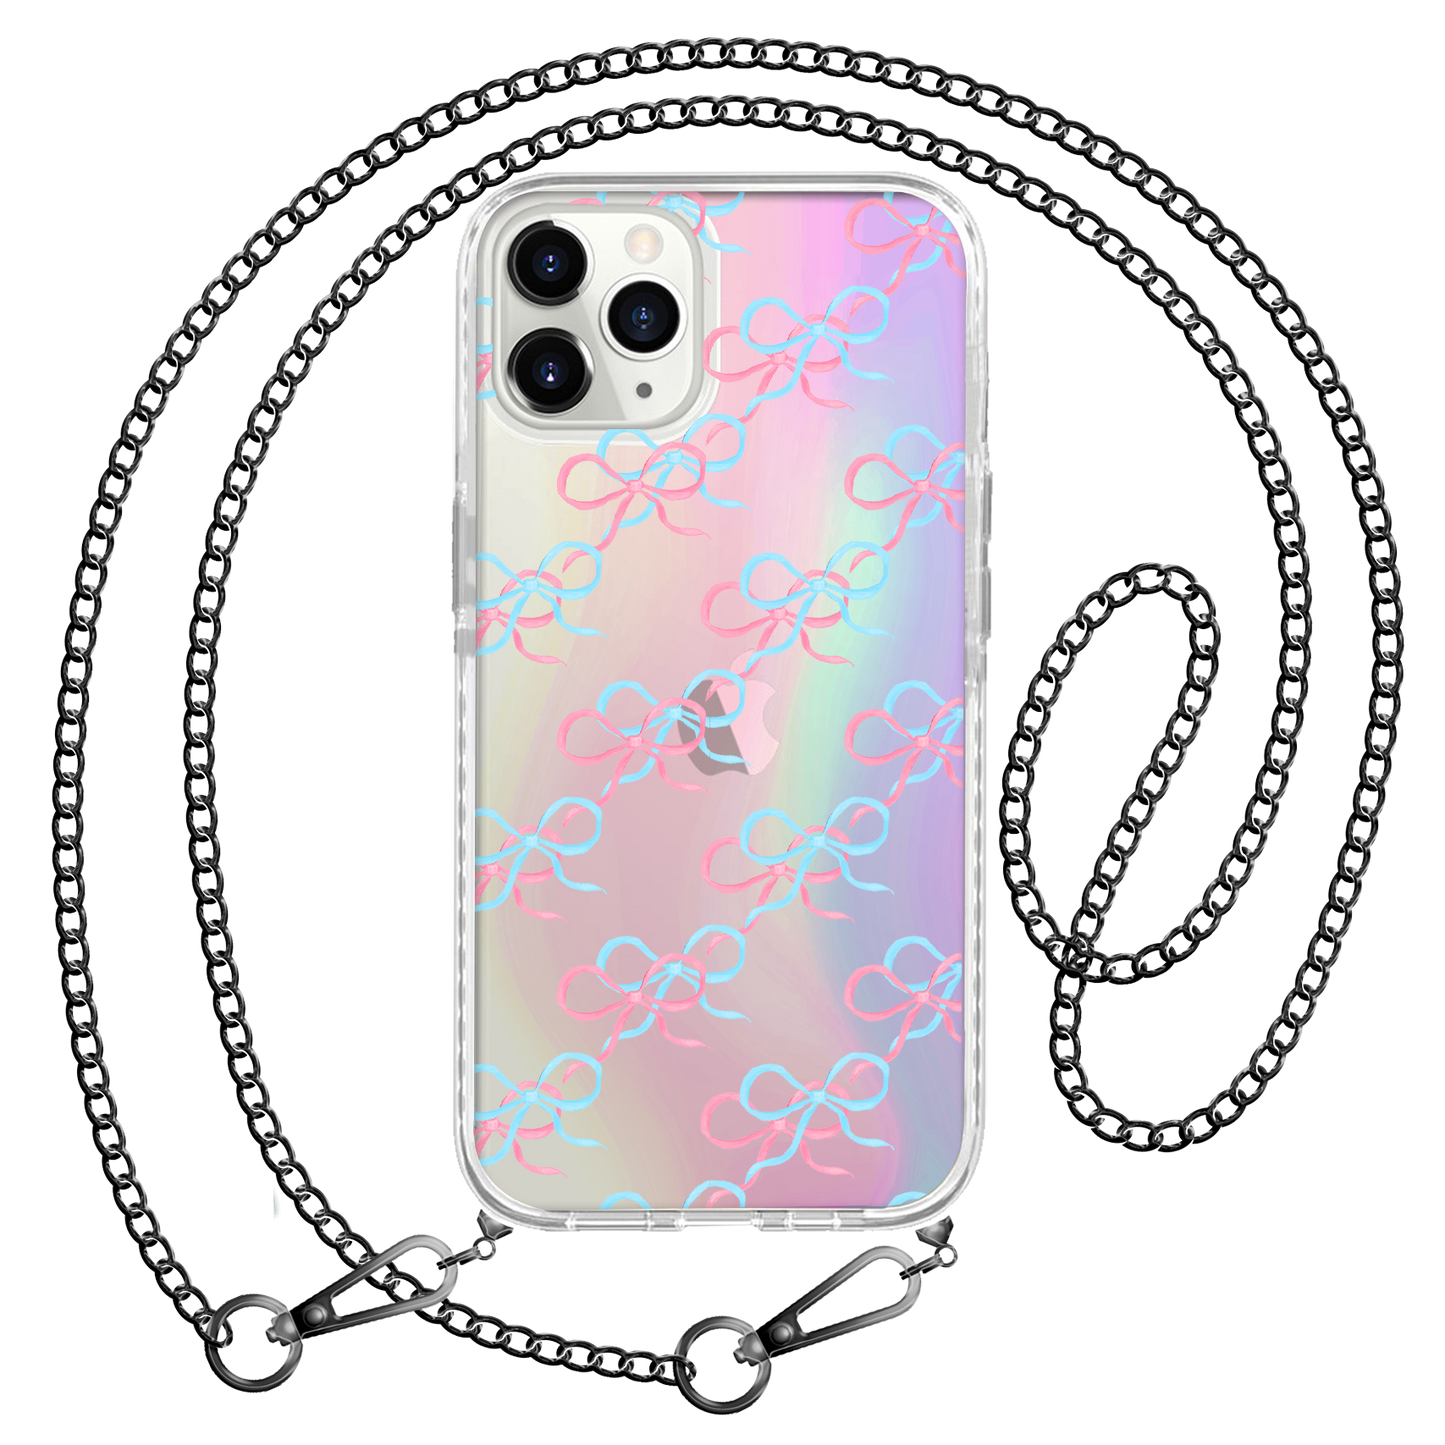 iPhone Rearguard Holo - Coquette Pink & Blue Bow